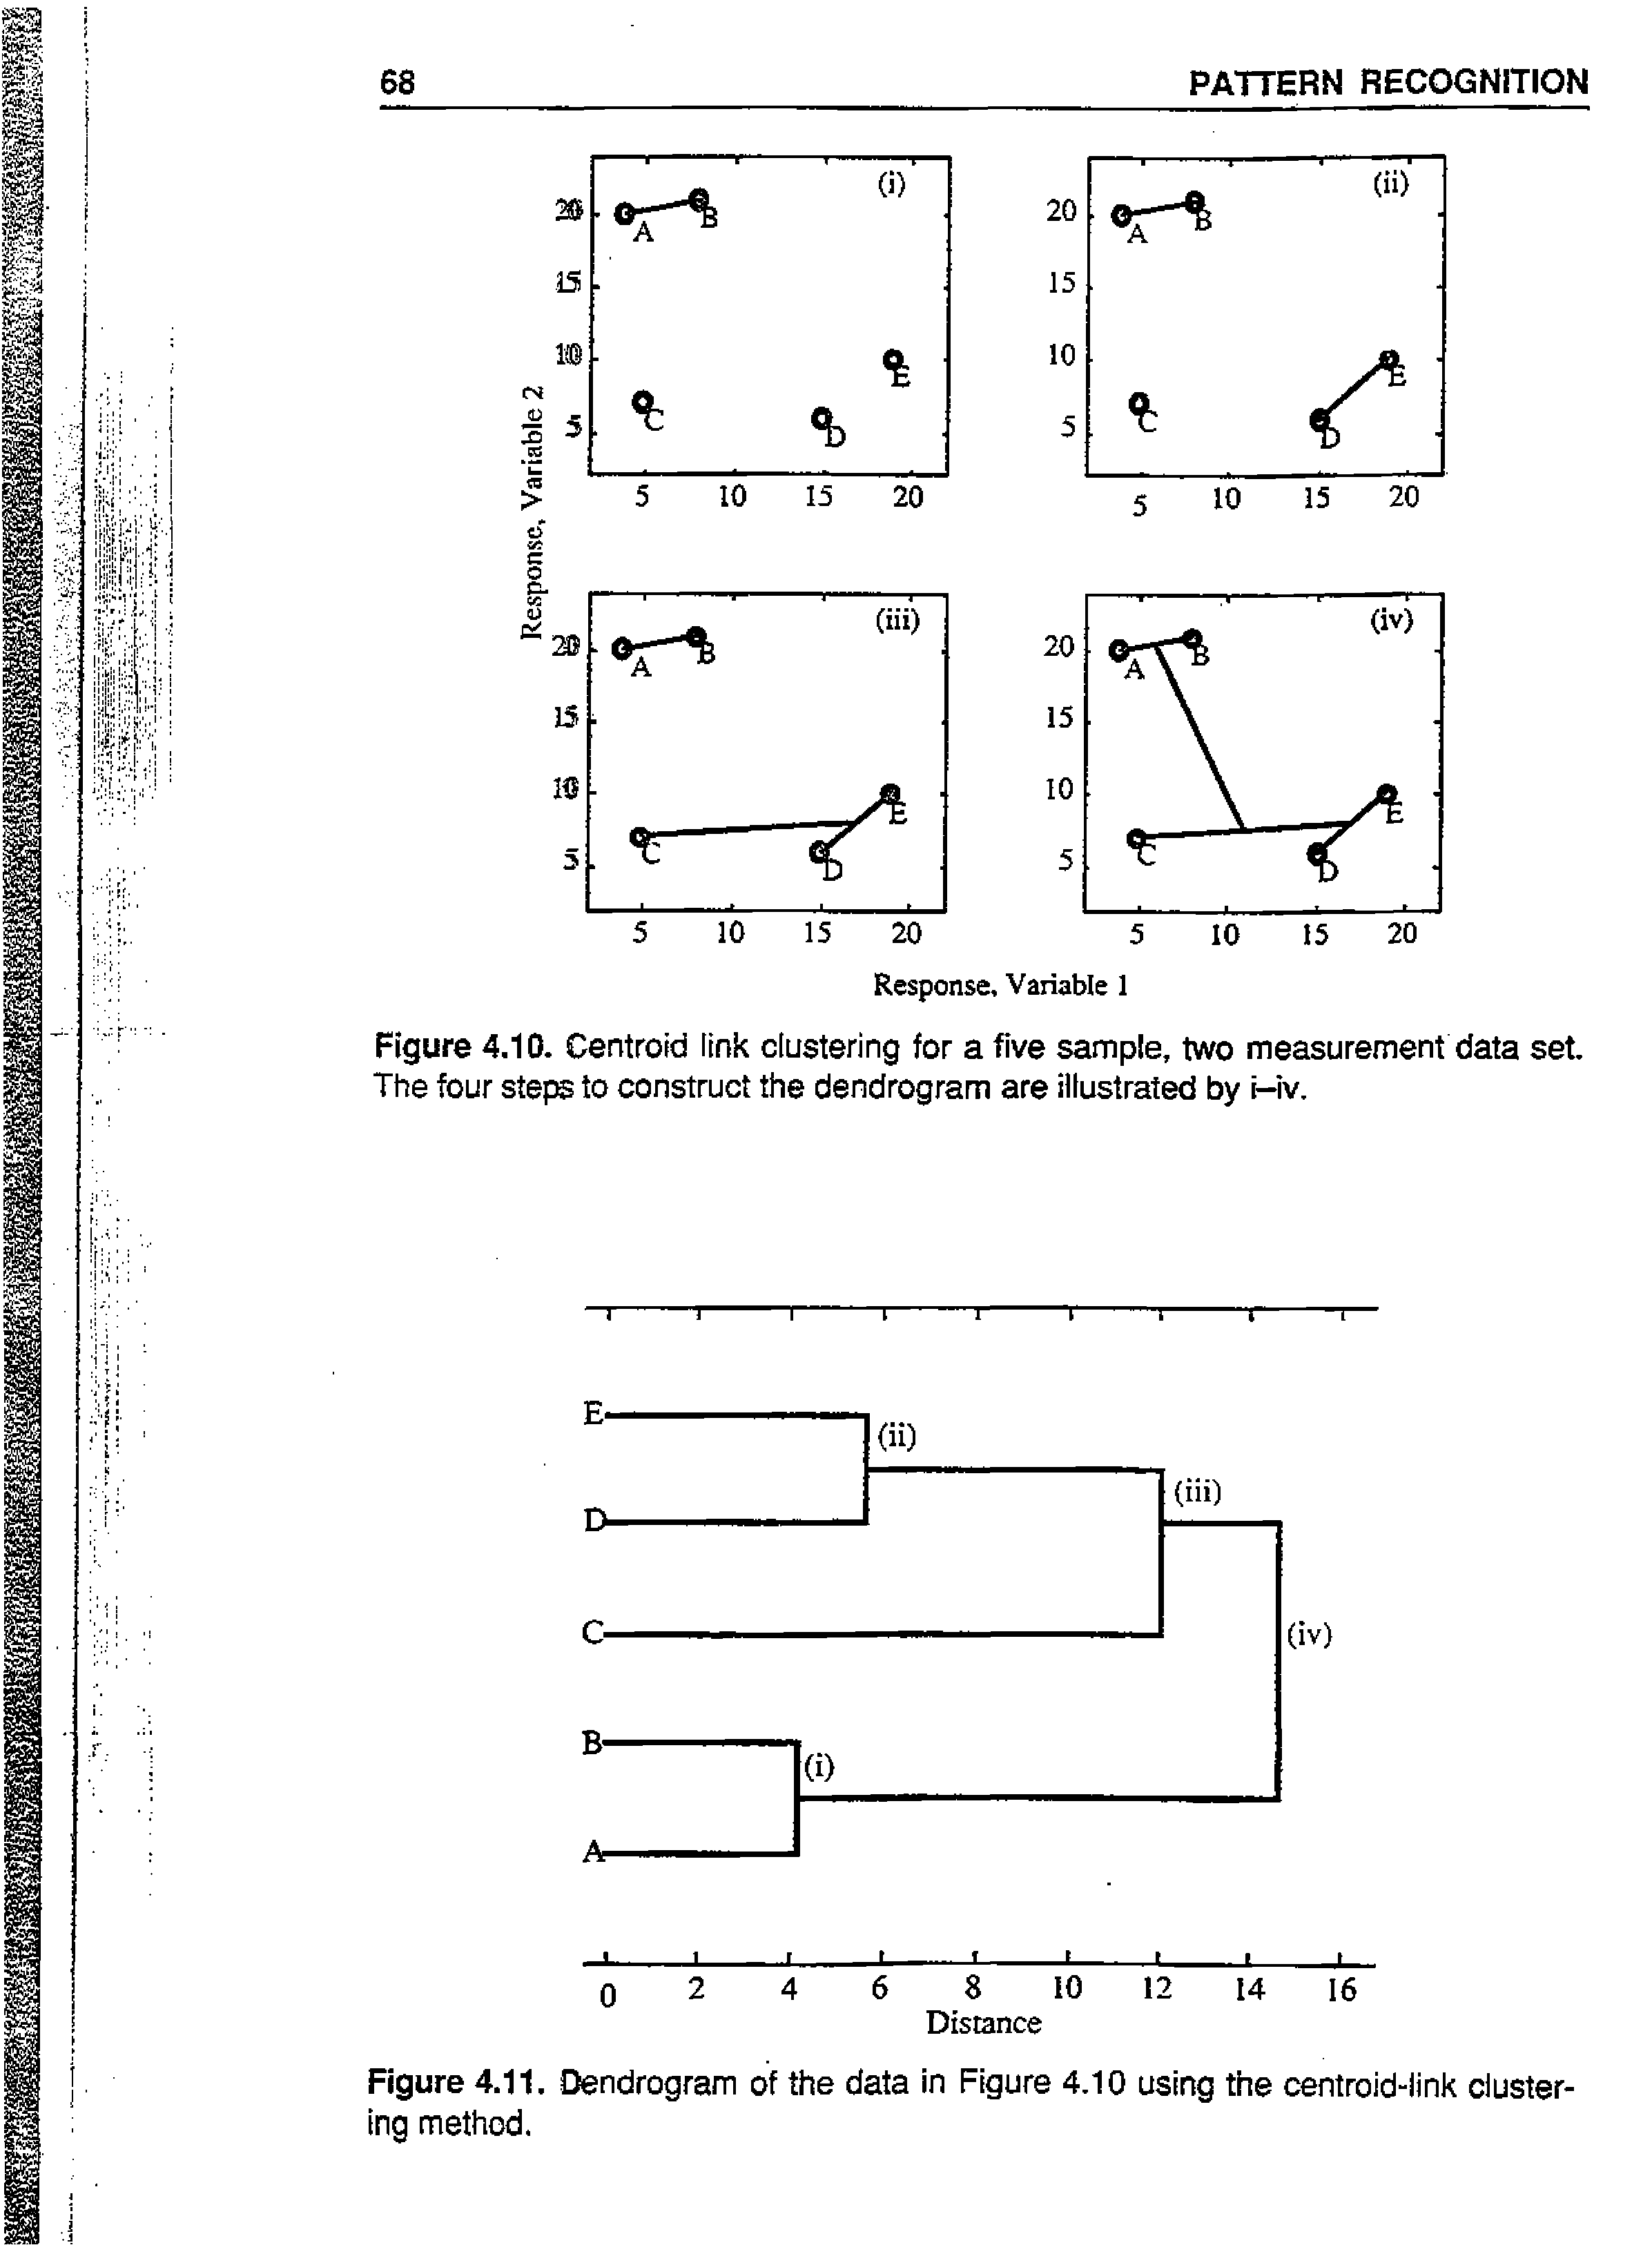 Figure 4.10. Centroid link clustering for a five sample, two measurement data set. The four ste ffi to construct the dendrogram are illustrated by i-iv.